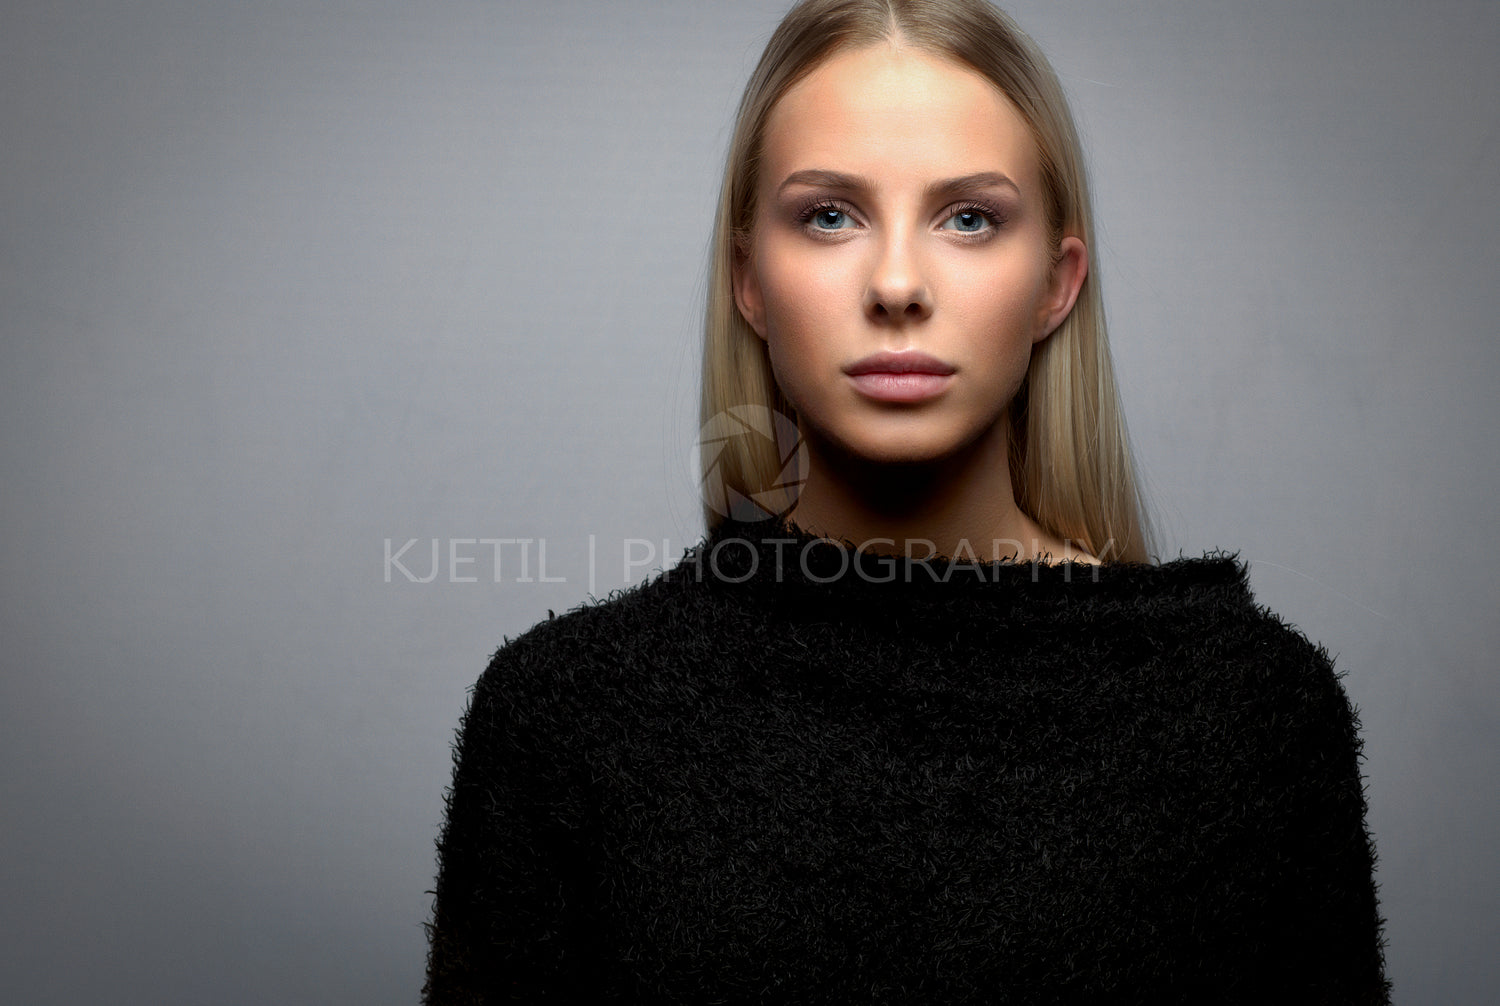 Studio portrait of a young blonde woman with fury jacket